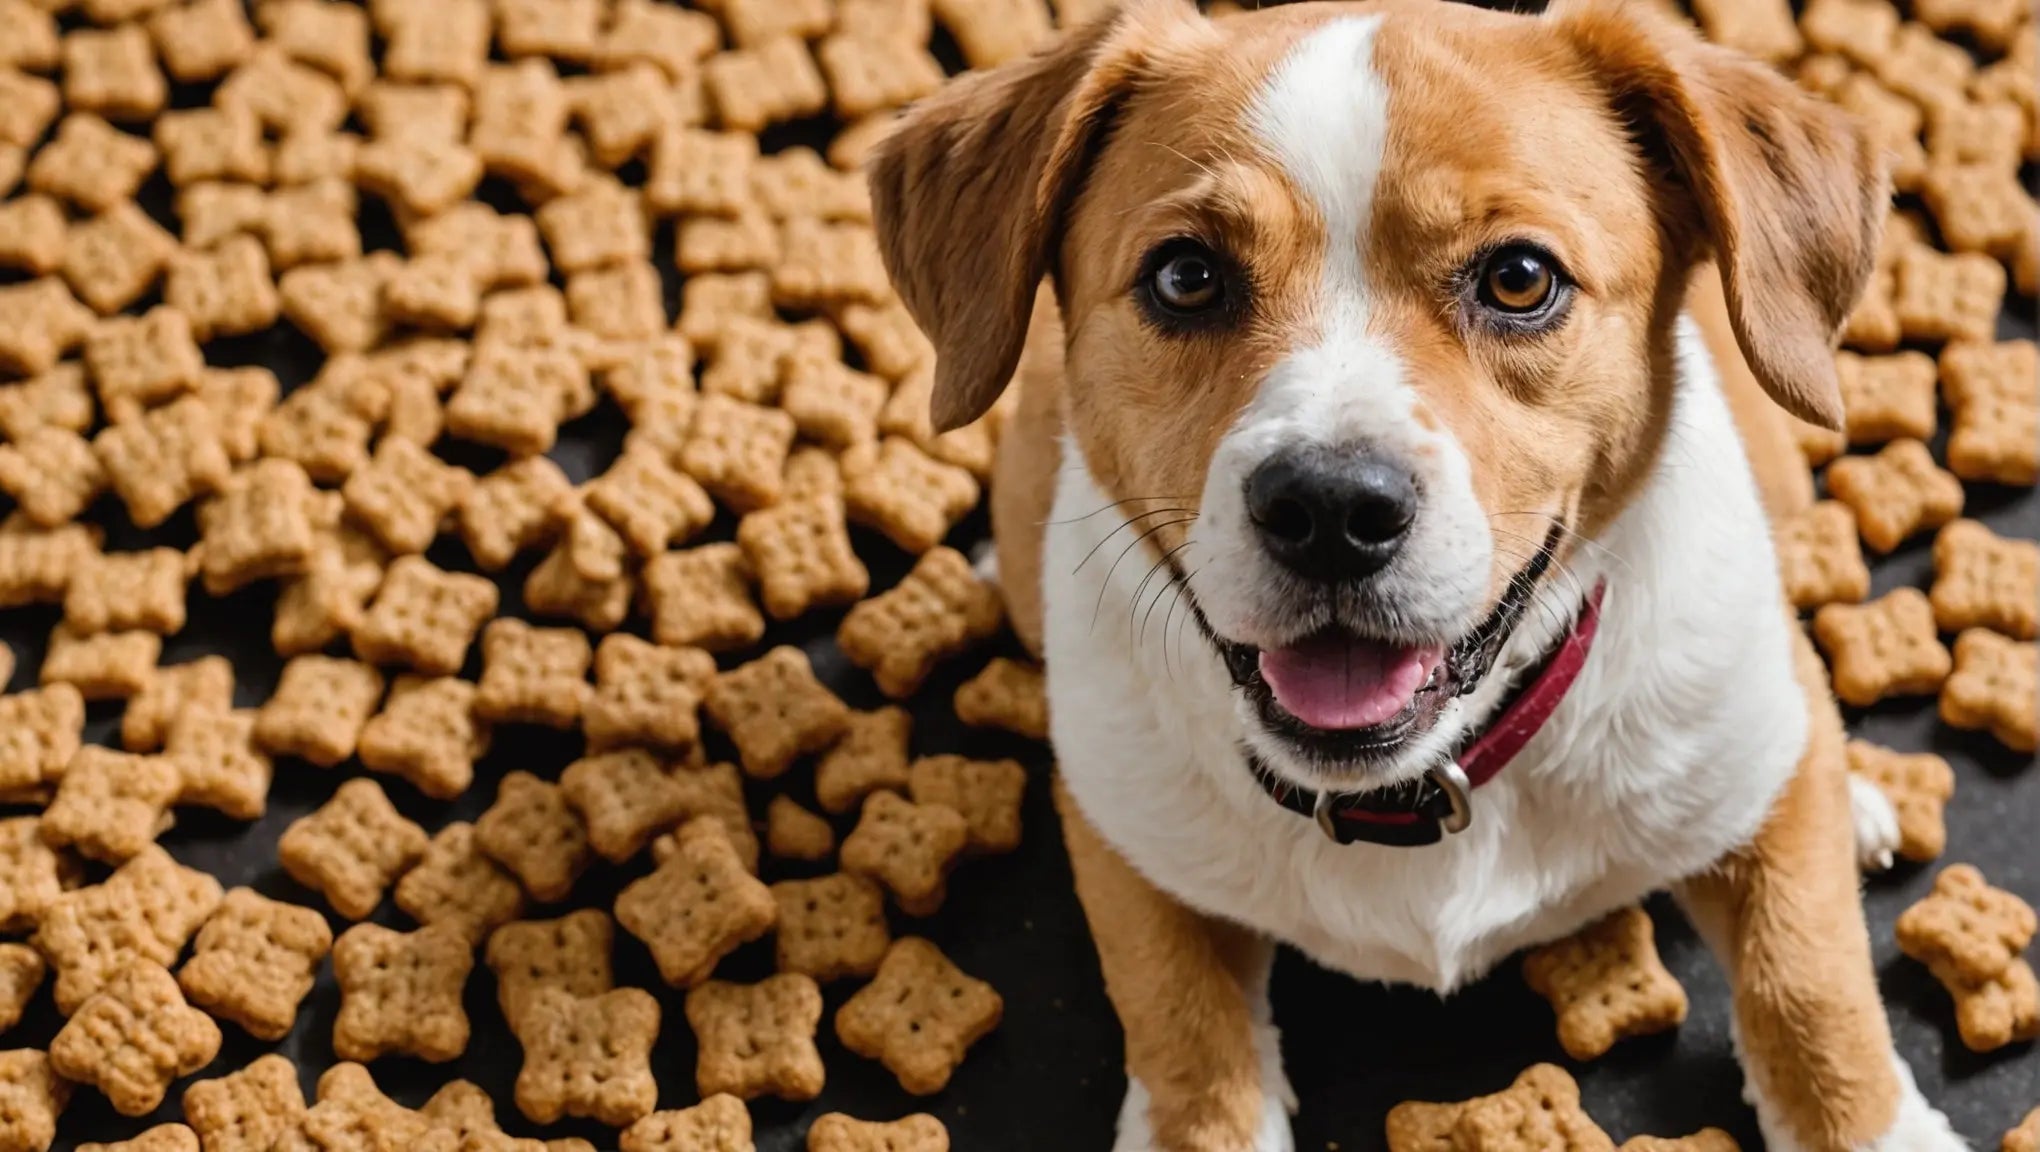 Crunchy Dog Treats That Will Make Your Pup Beg for More